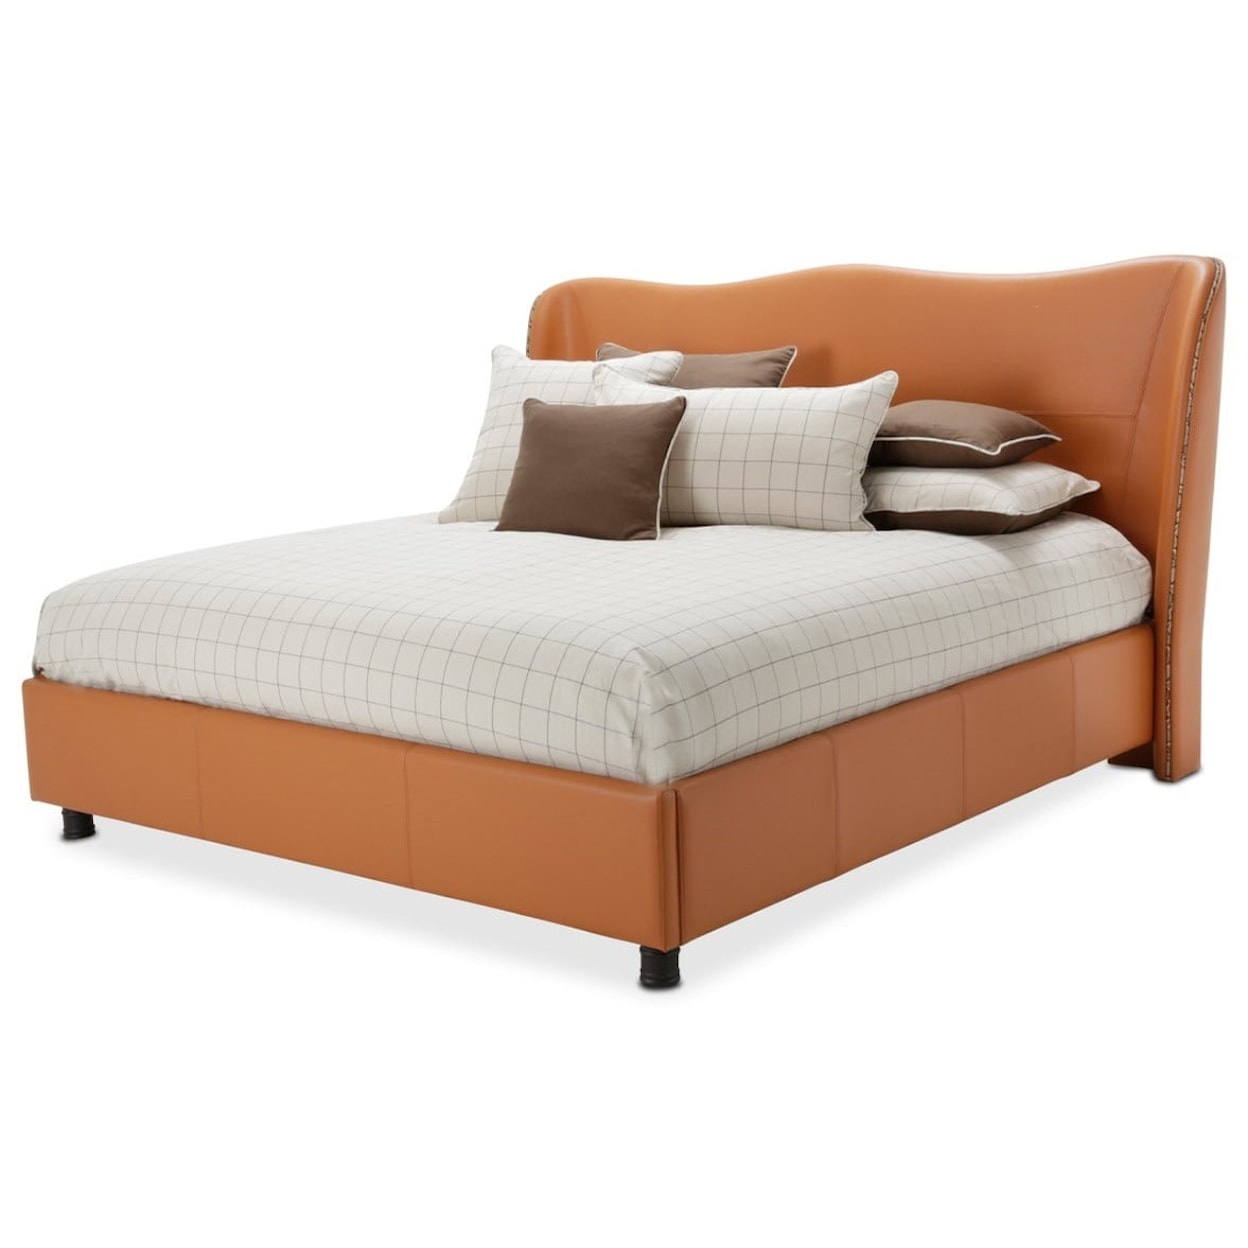 Michael Amini 21 Cosmopolitan Upholstered Queen Scalloped Bed